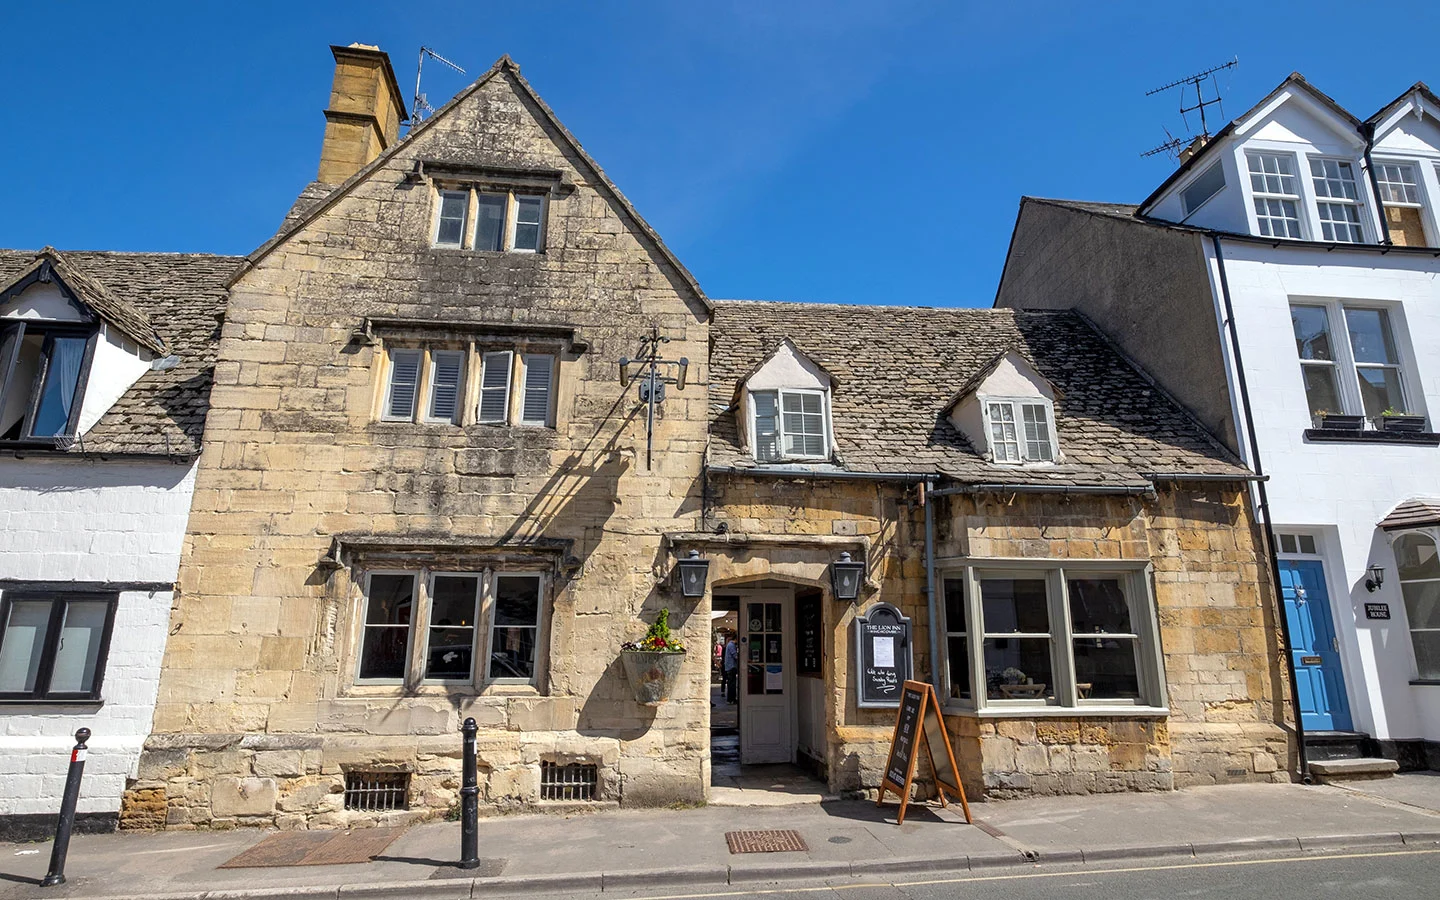 The Lion Inn in Winchcombe